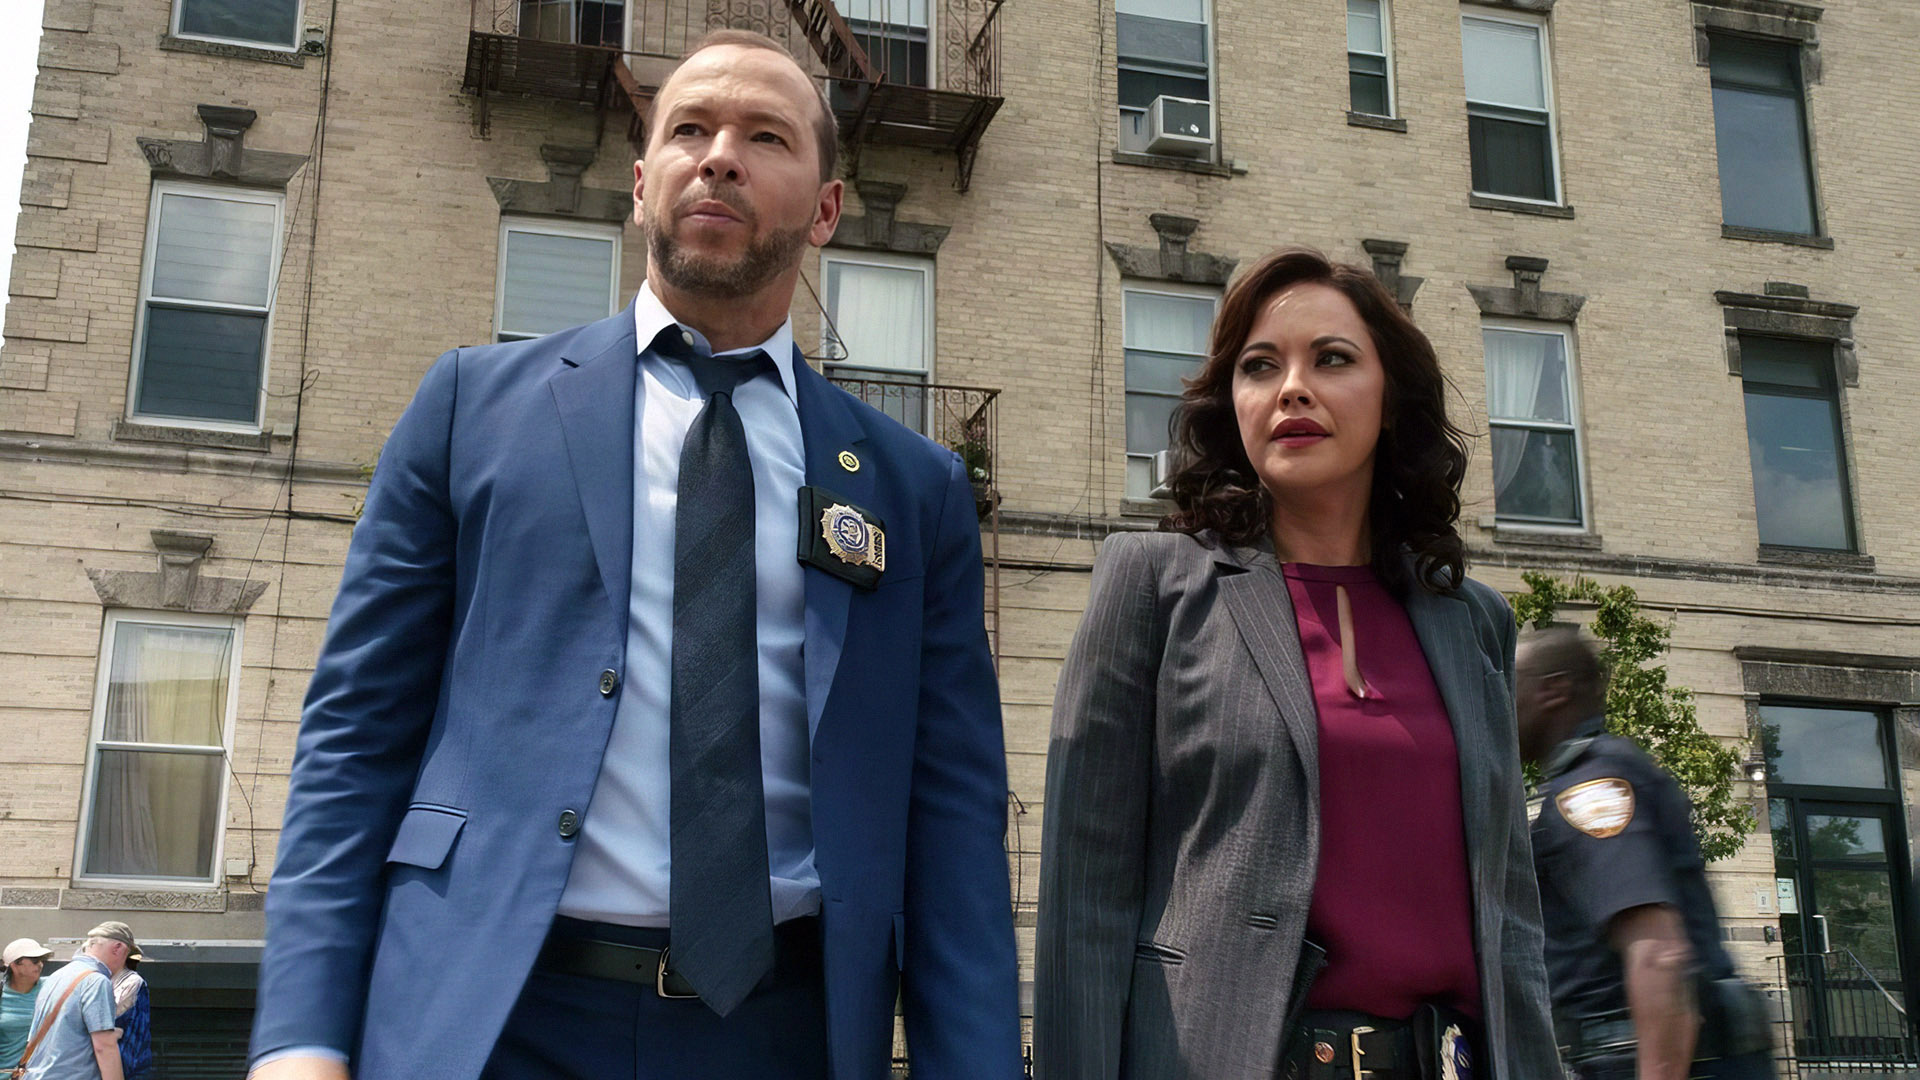 A Fond Farewell Previewing the Final Season of Blue Bloods.